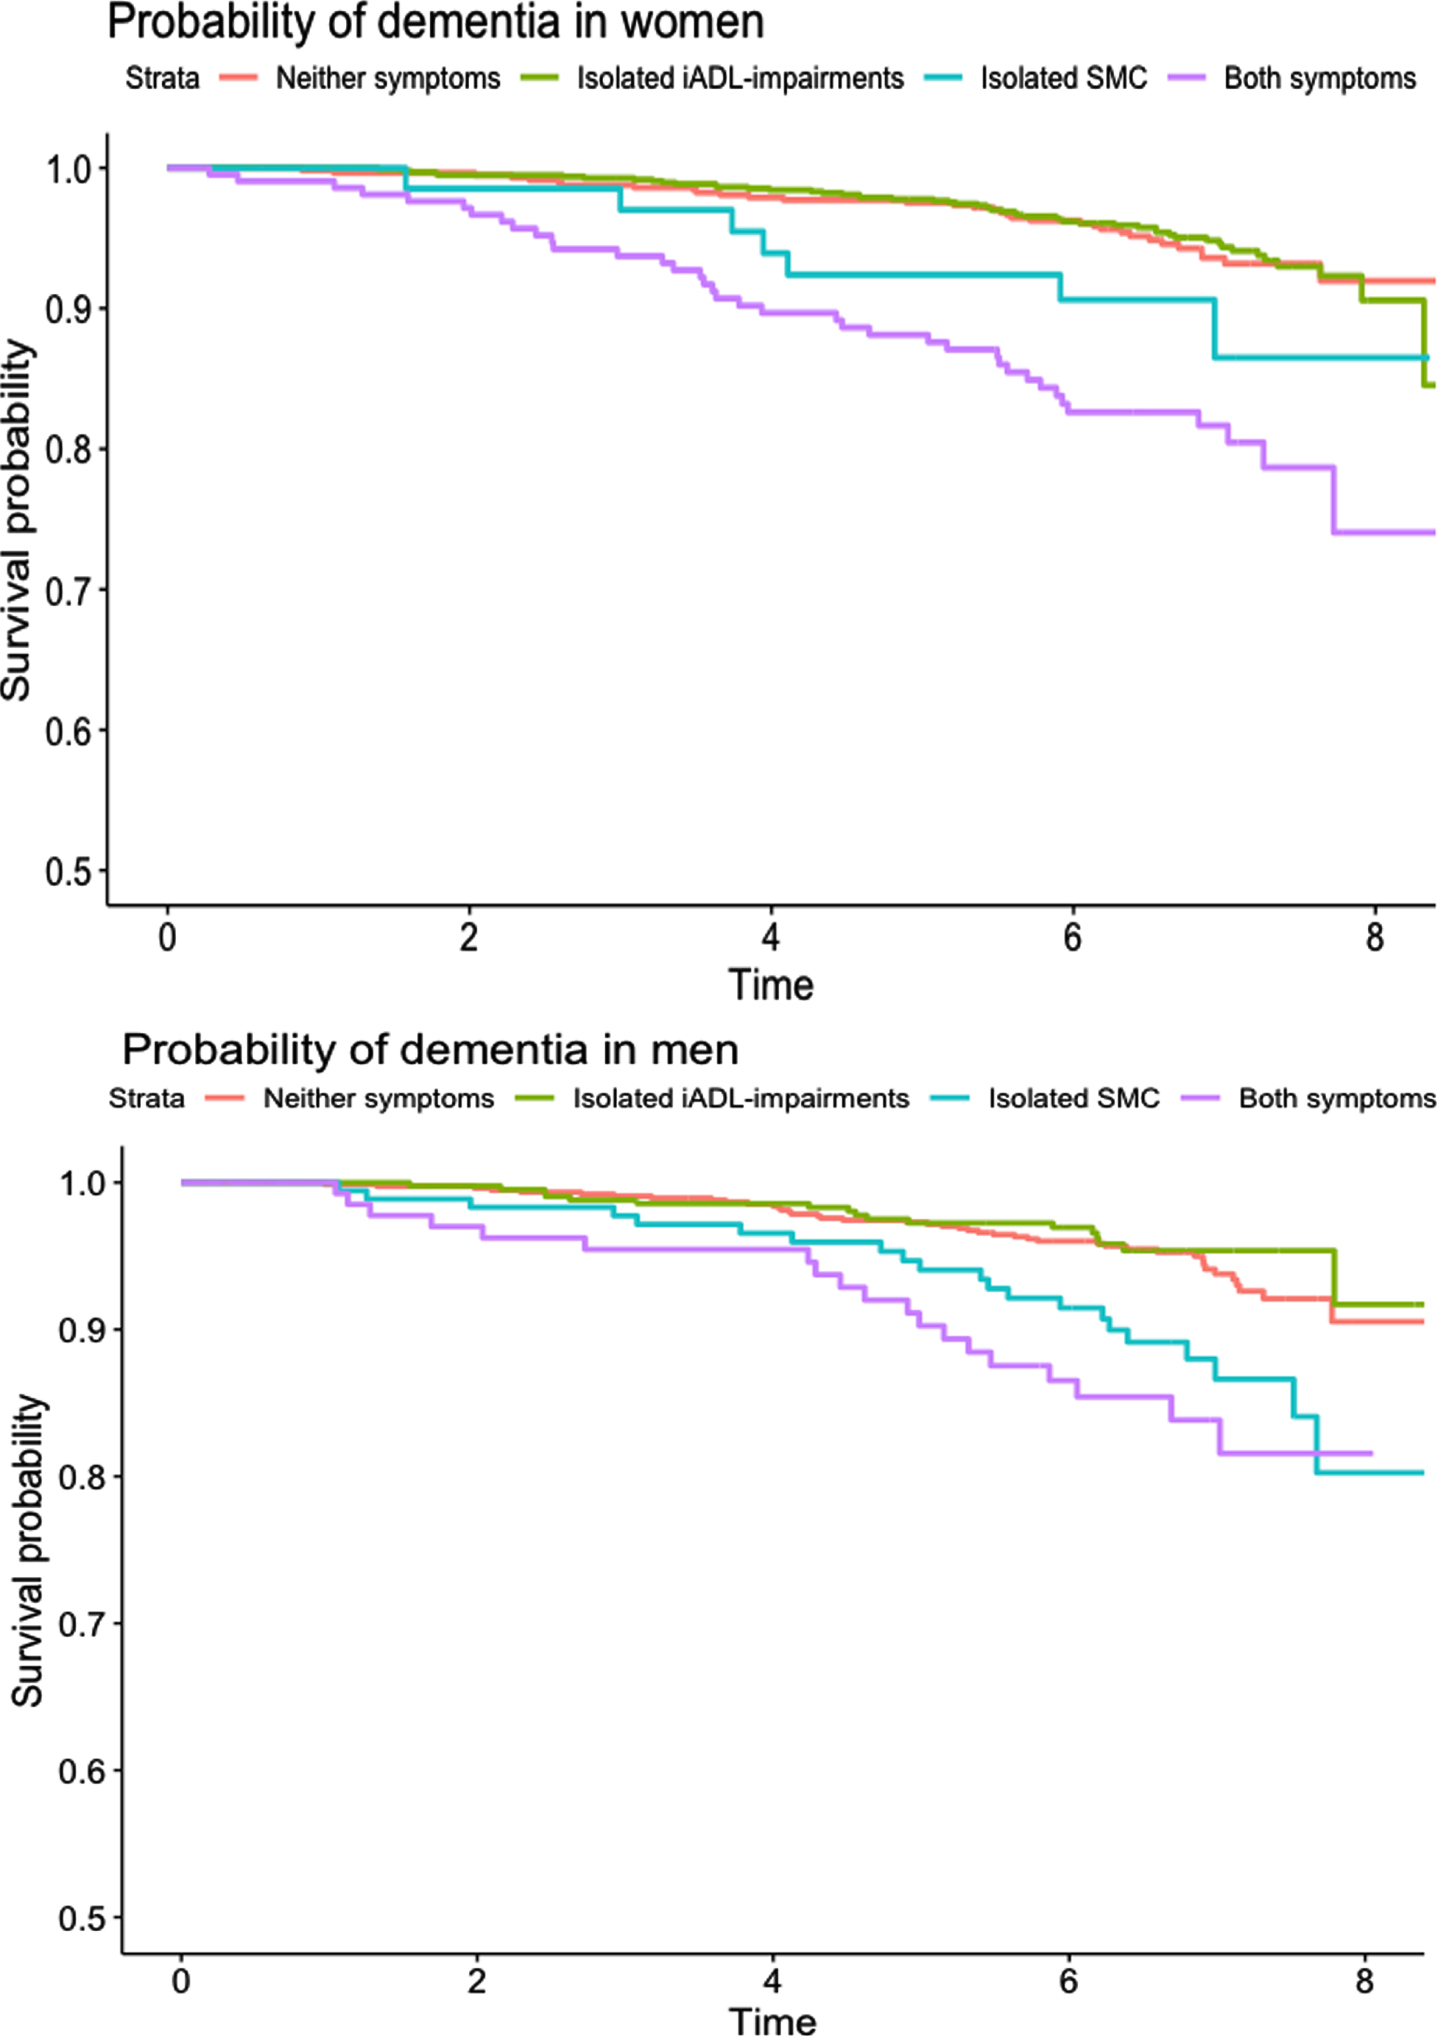 Kaplan-Meier curves for probability of dementia in men and women over 8 years of study follow-up.